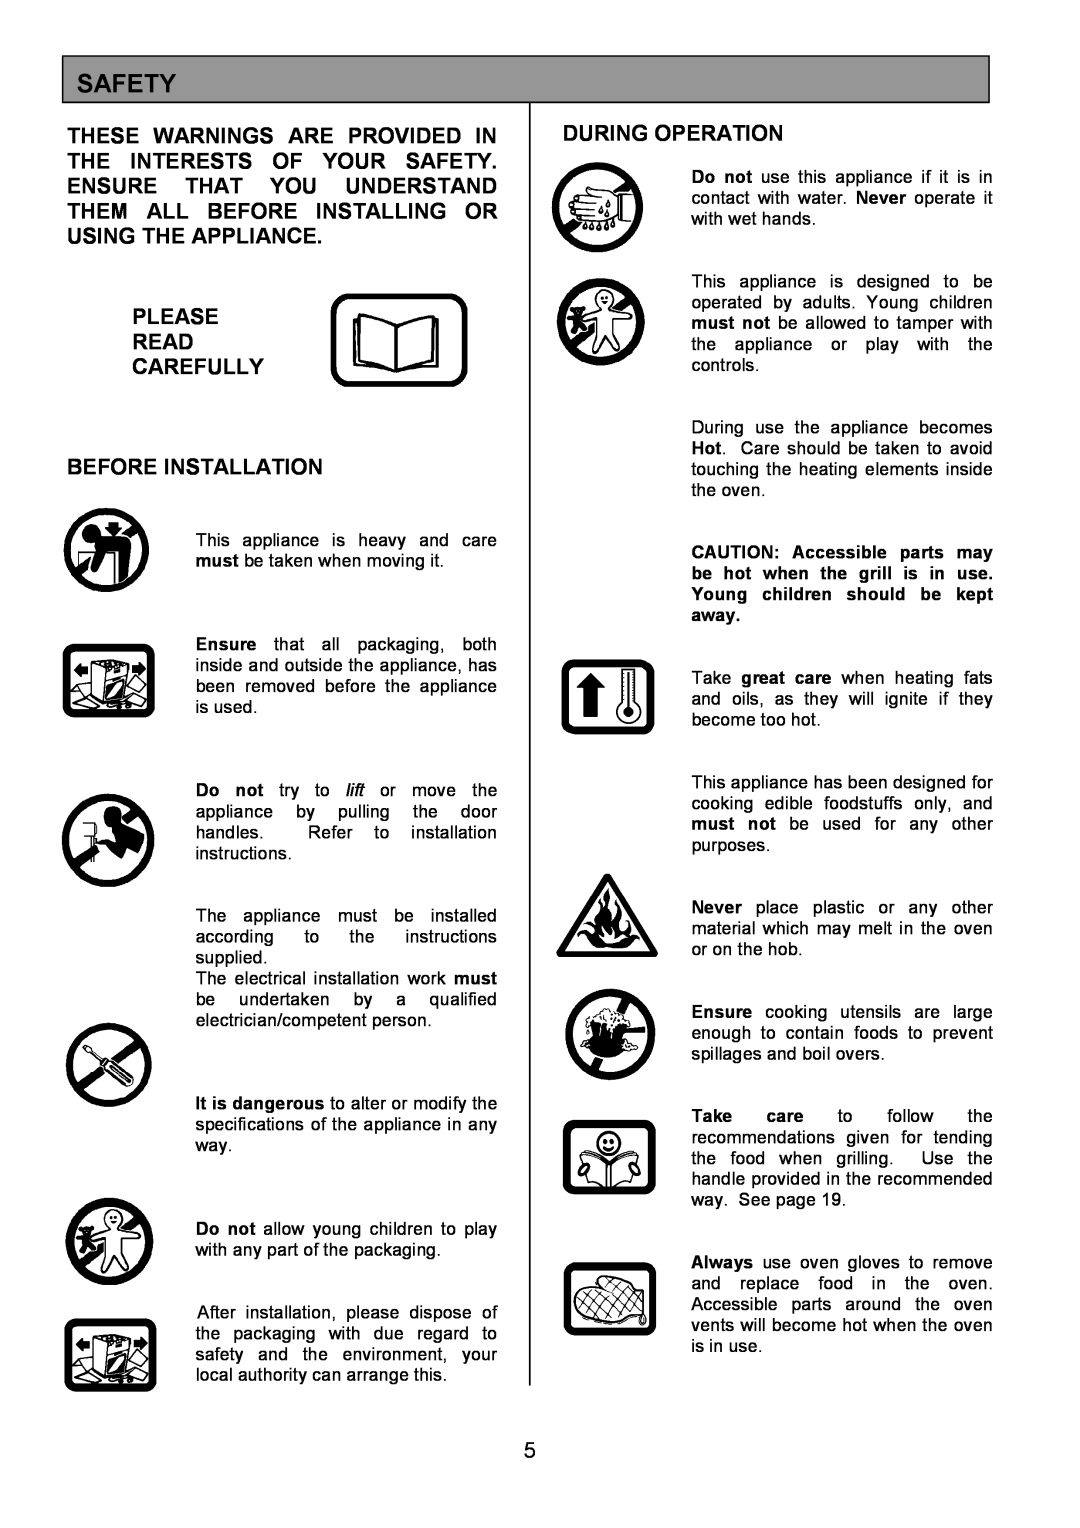 Zanussi ZDQ 695 manual Safety, Please Read Carefully Before Installation, During Operation 